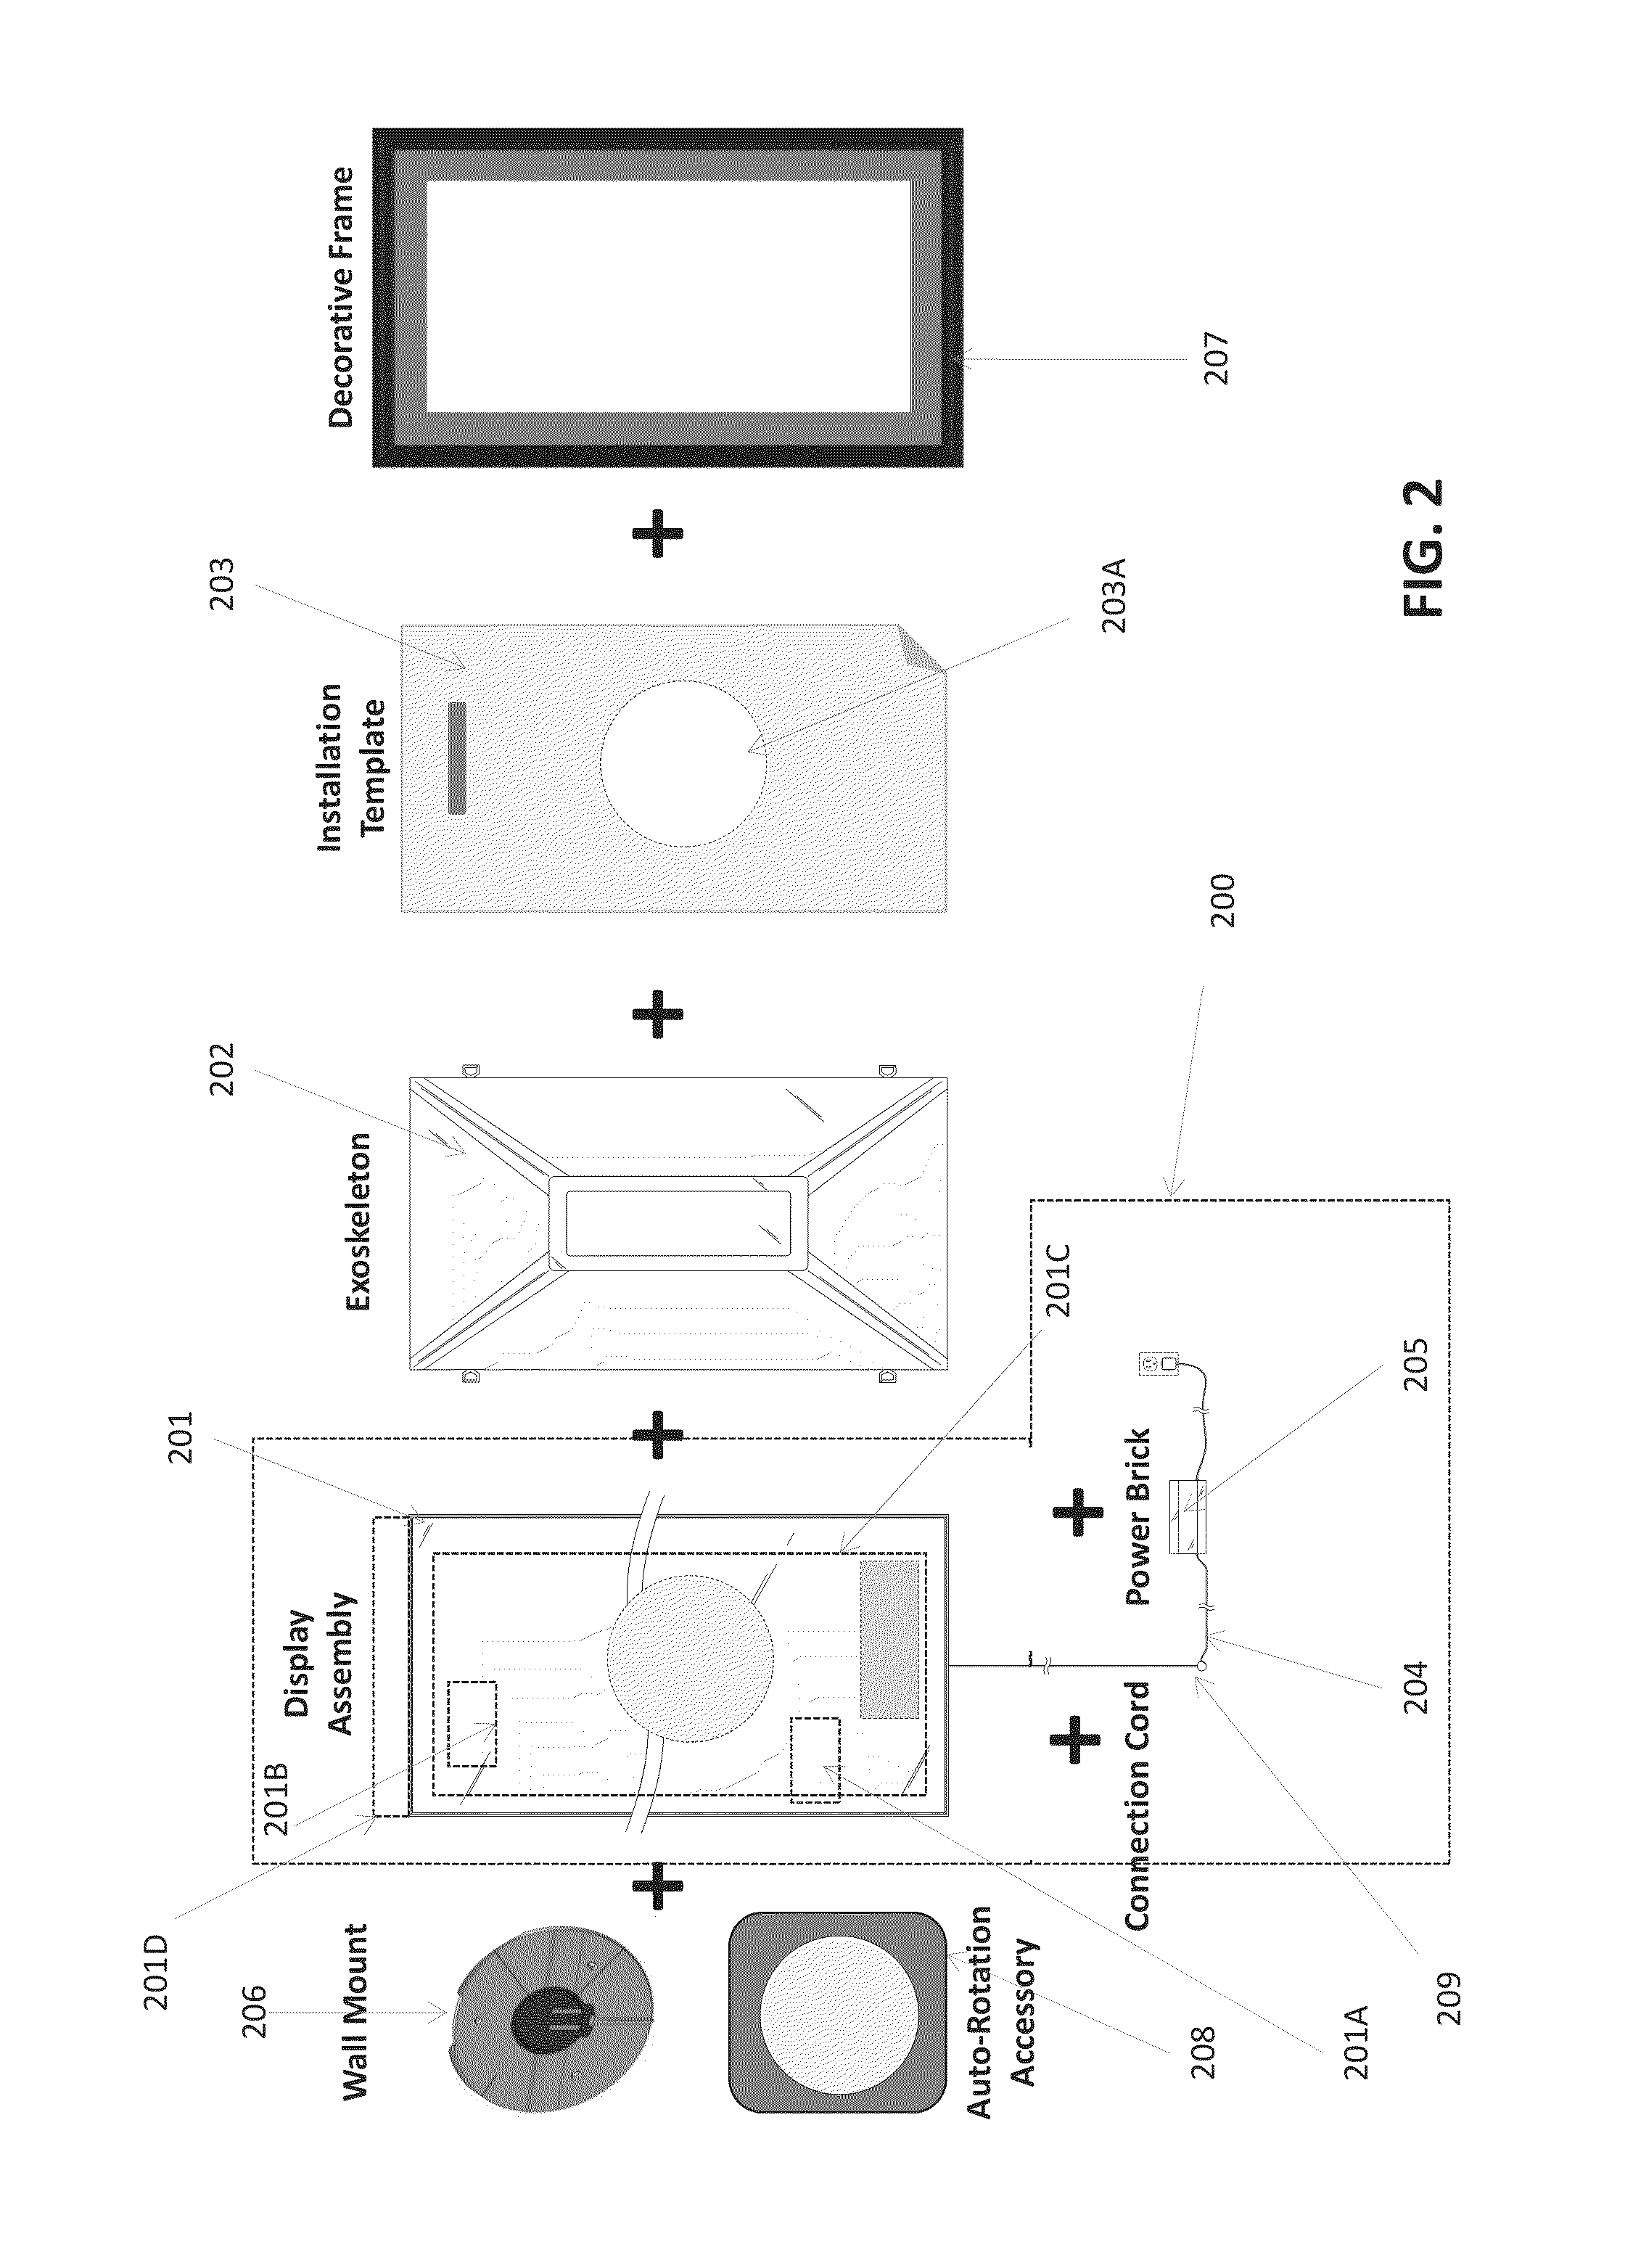 Systems and Methods for Controlling the Distribution and Viewing of Digital Art and Imaging Via the Internet